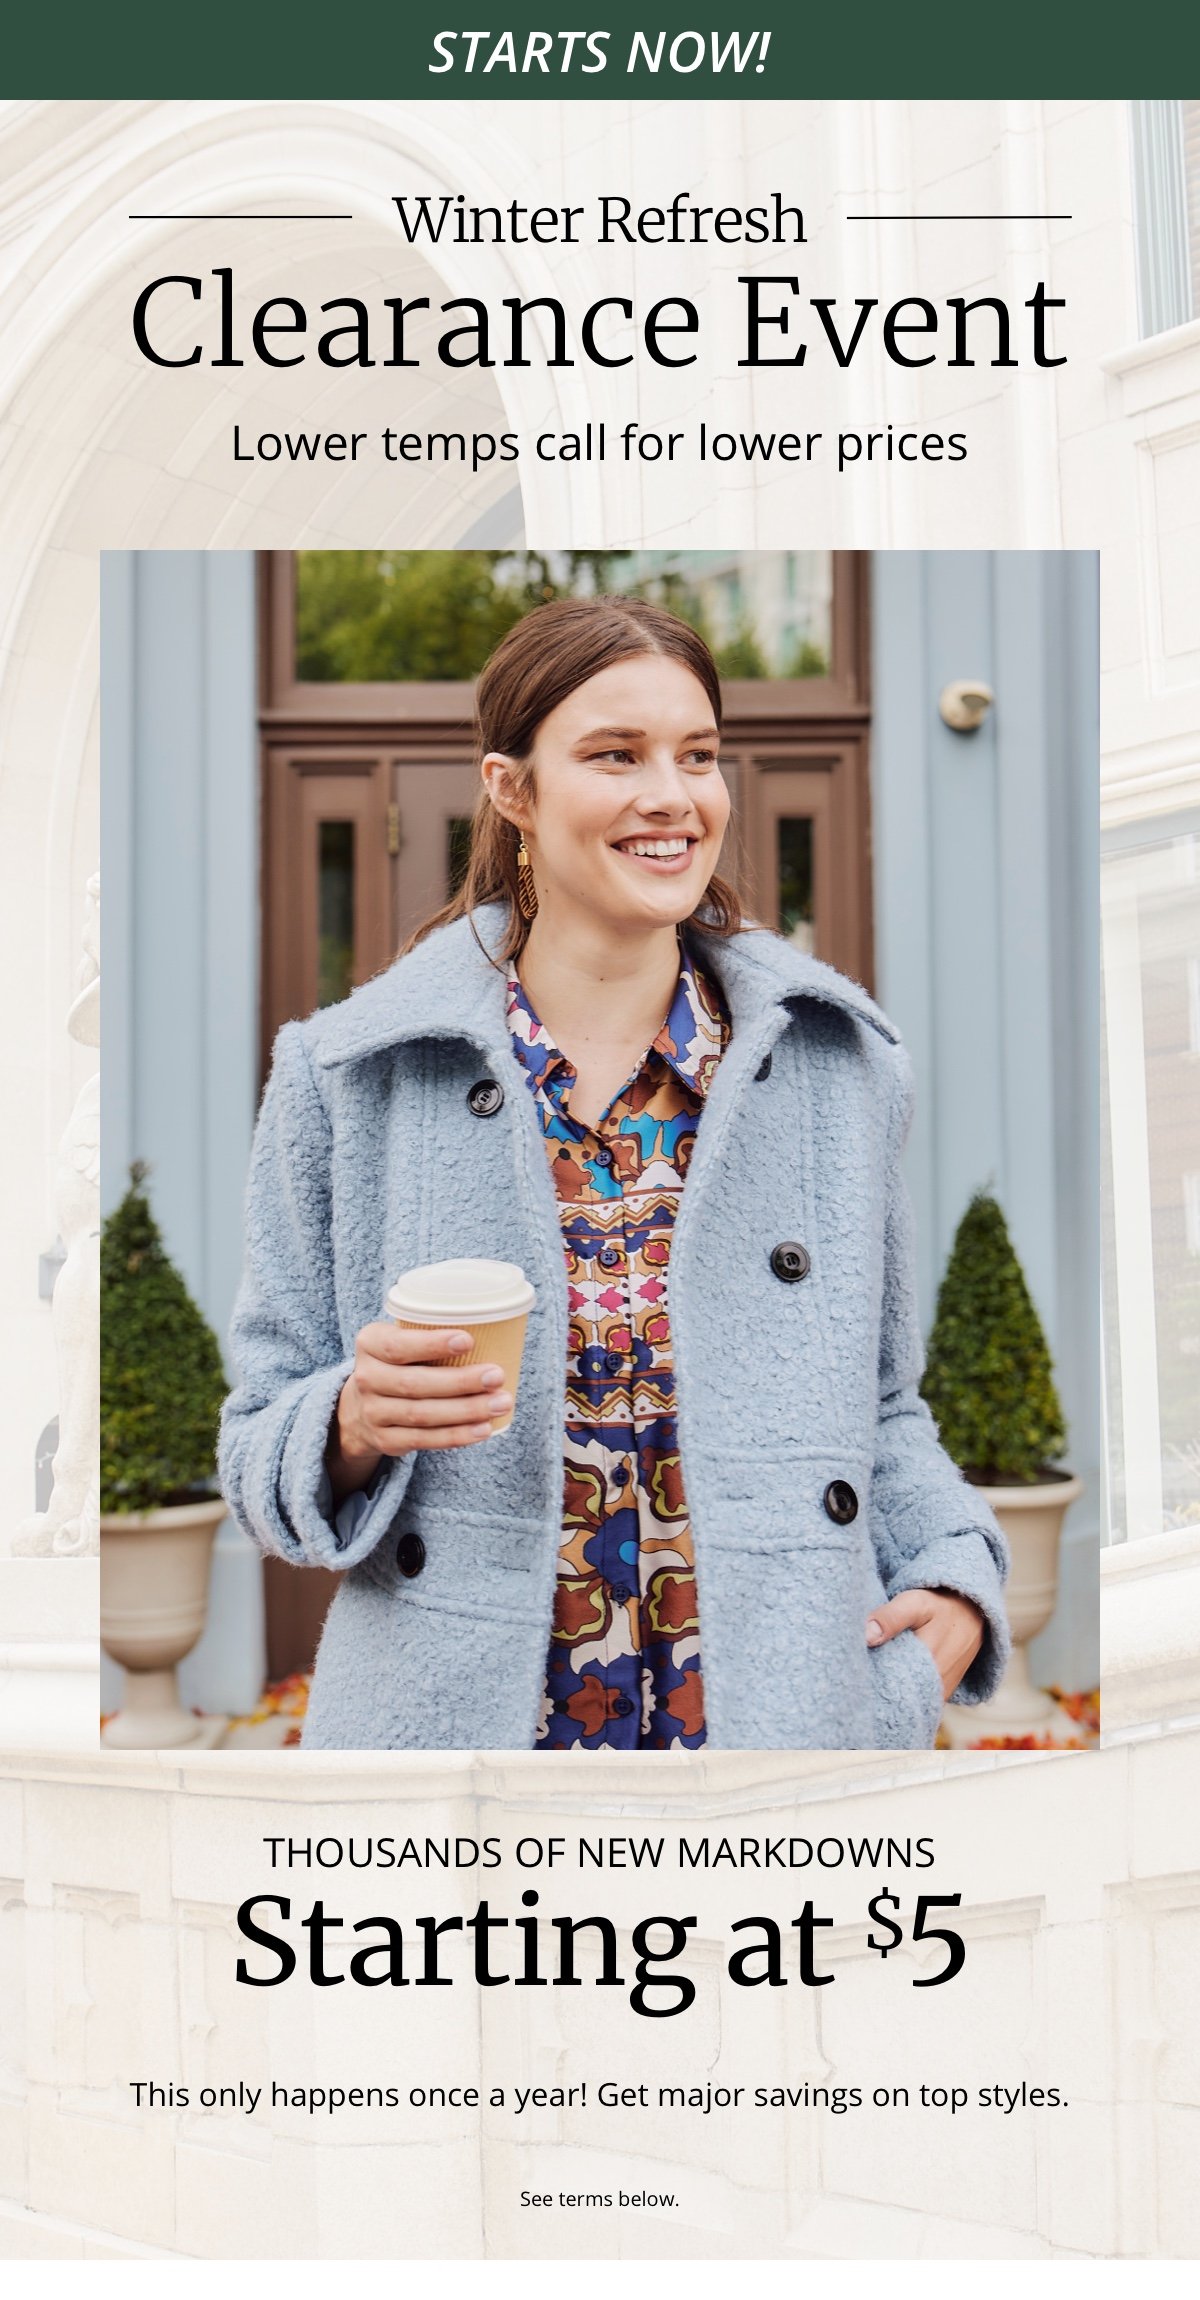 Starts Now!|Winter Refresh|Clearance Event|Lower temps call for lower prices|Thousands of New Markdowns|Starting at \\$5|This only happens once a year! Get major savings on top styles|See terms below.